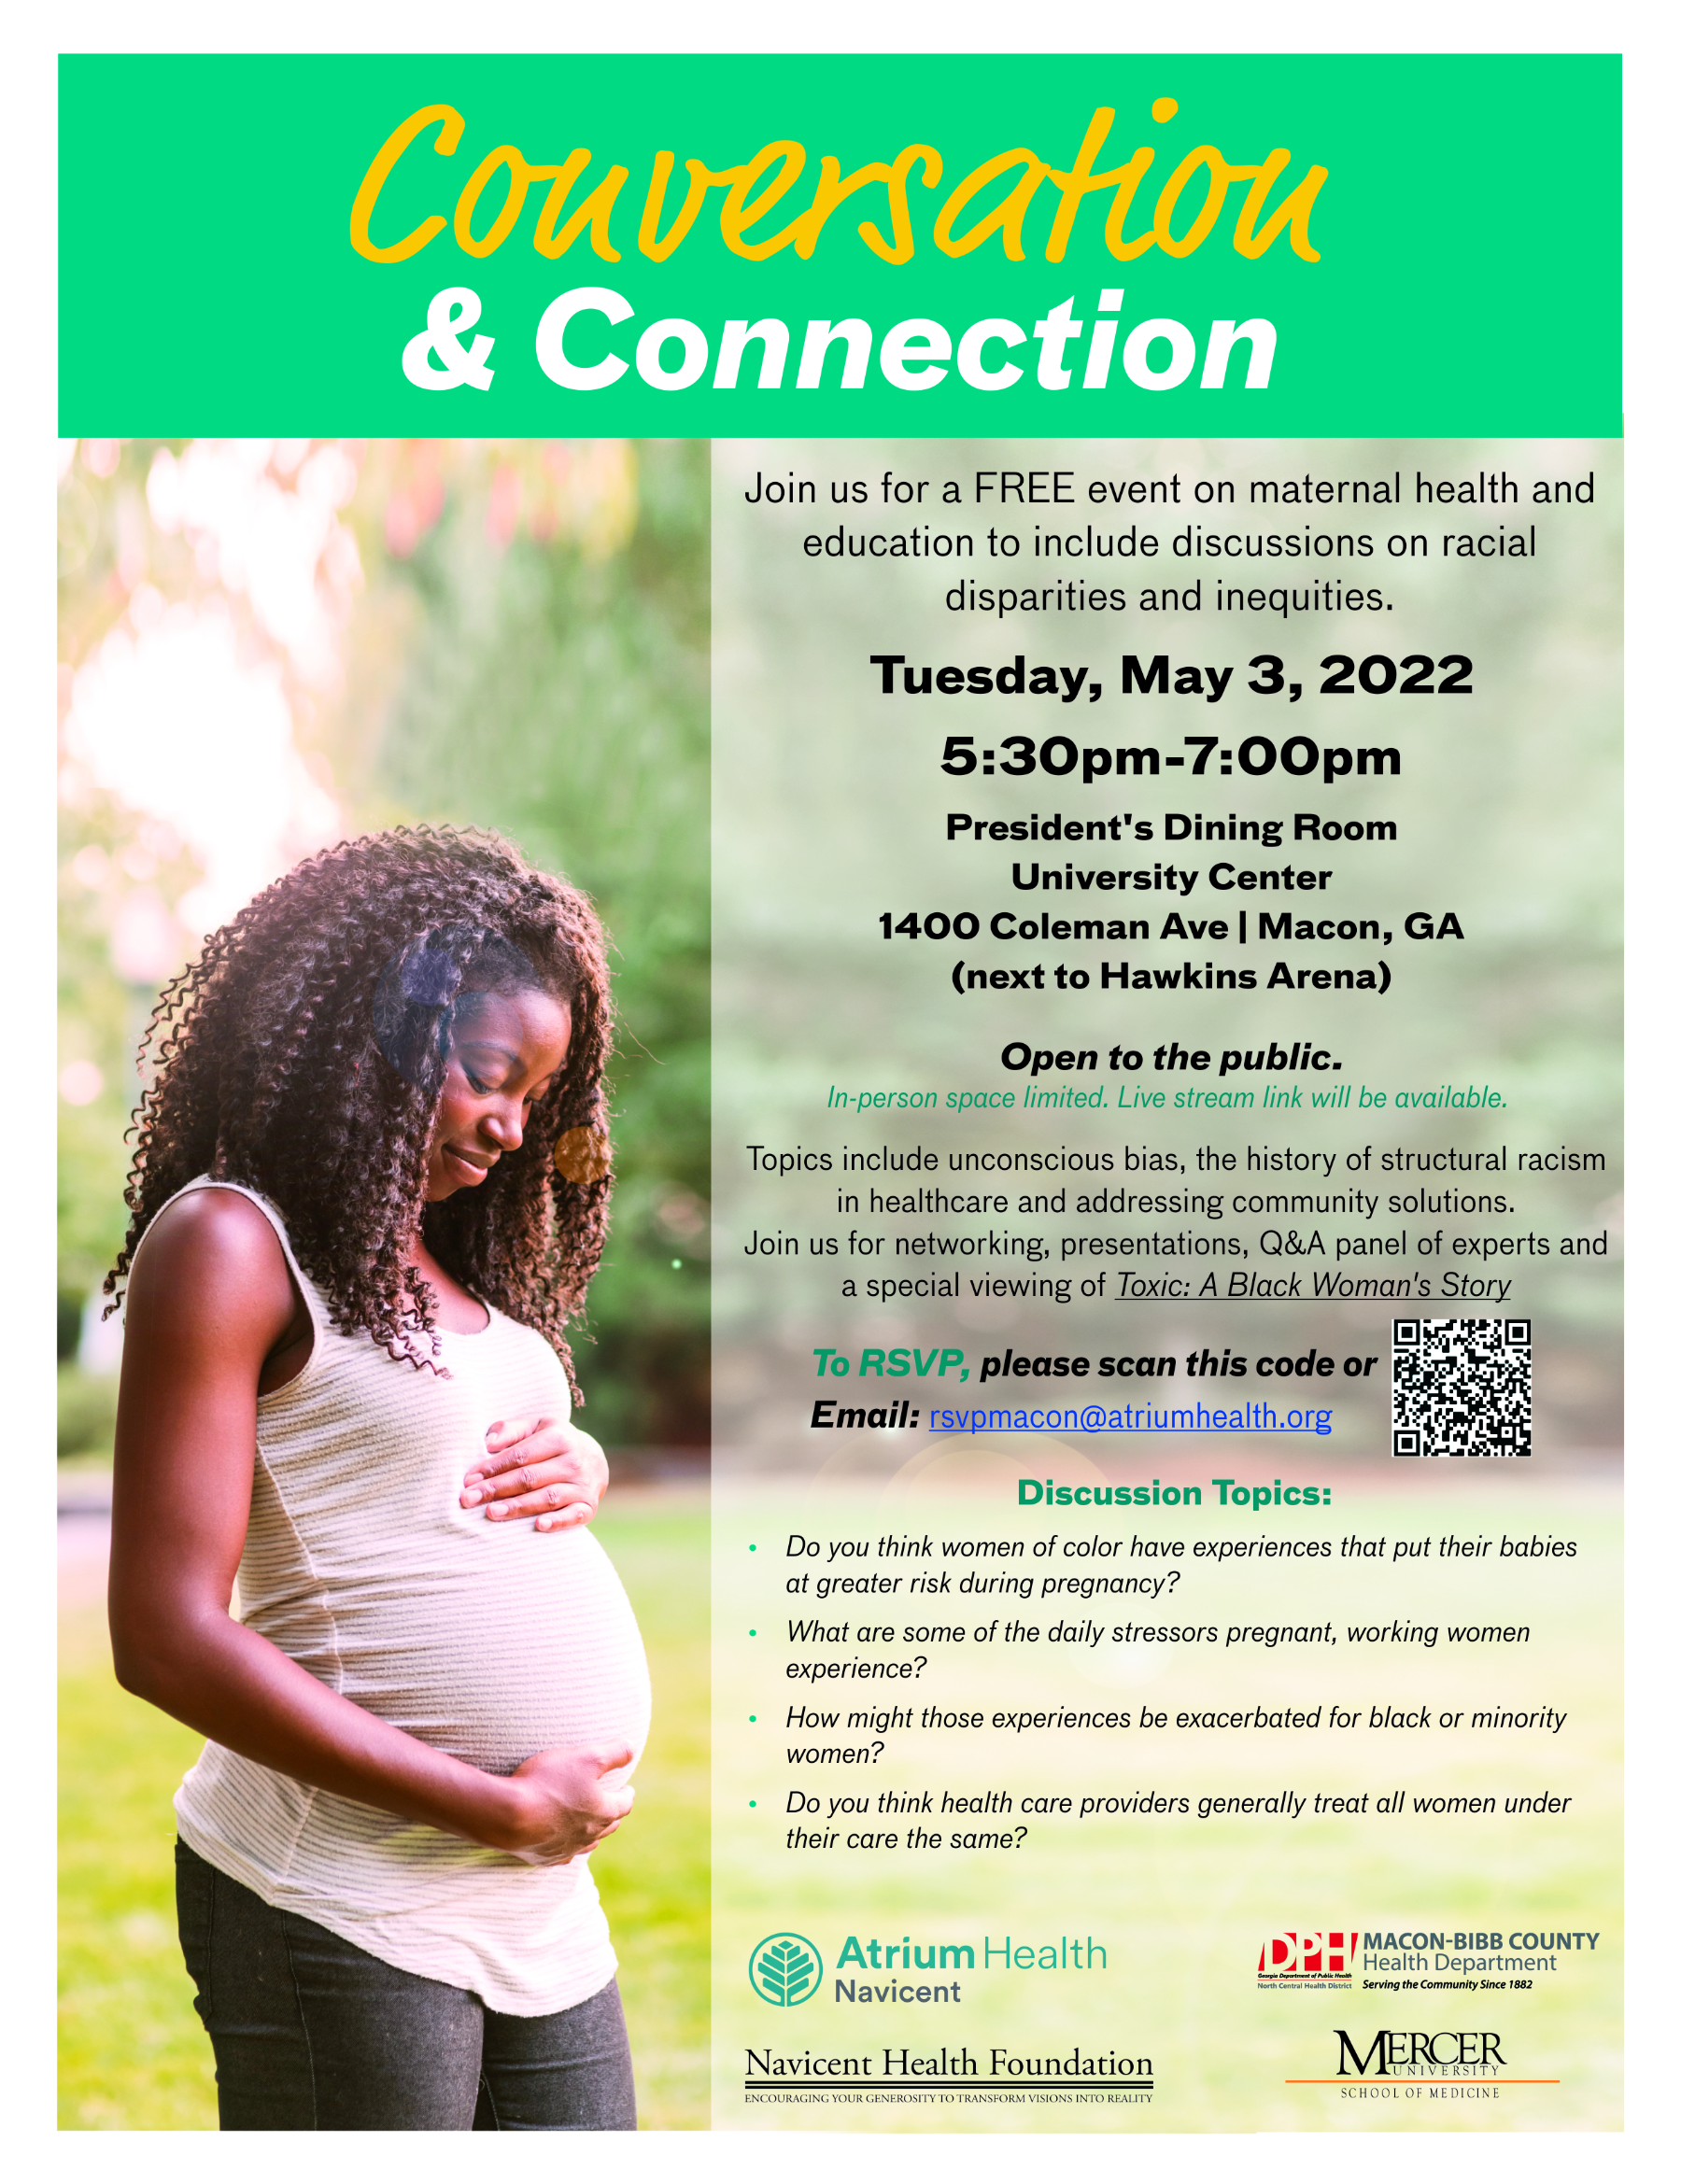 Free event to examine racial disparities in maternal health